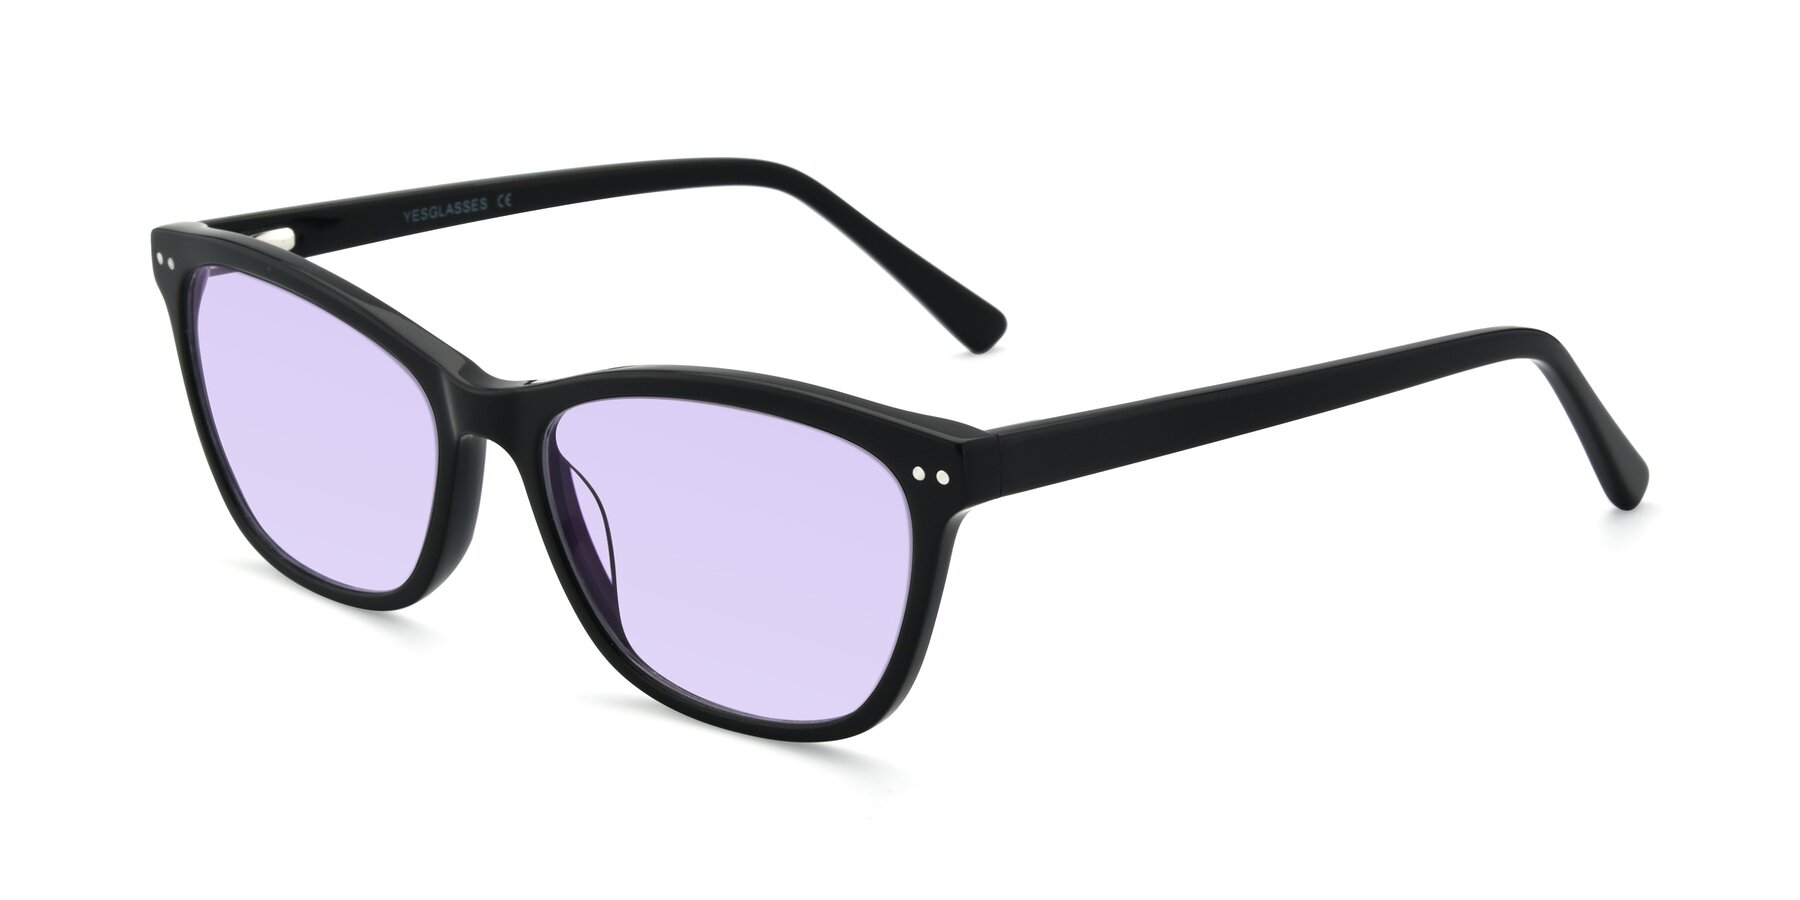 Angle of 17350 in Black with Light Purple Tinted Lenses